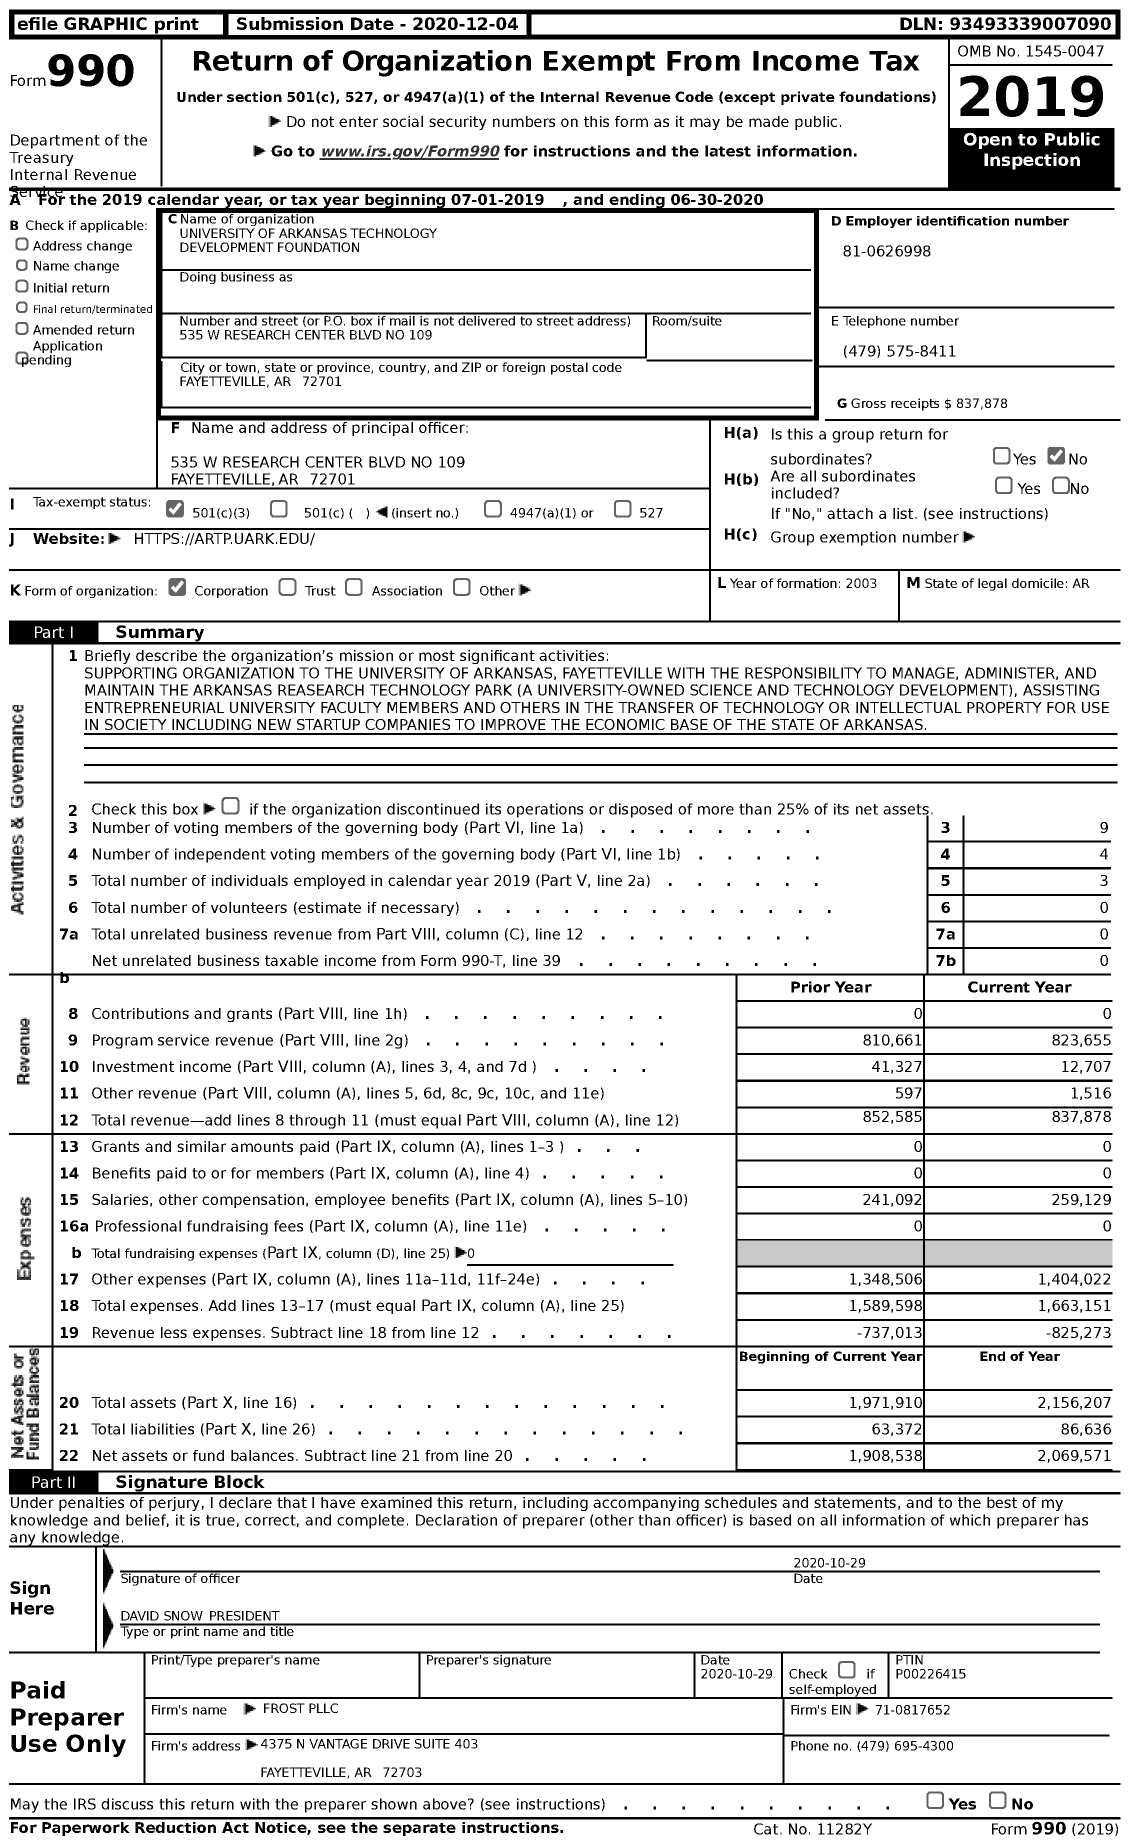 Image of first page of 2019 Form 990 for University of Arkansas Technology Development Foundation